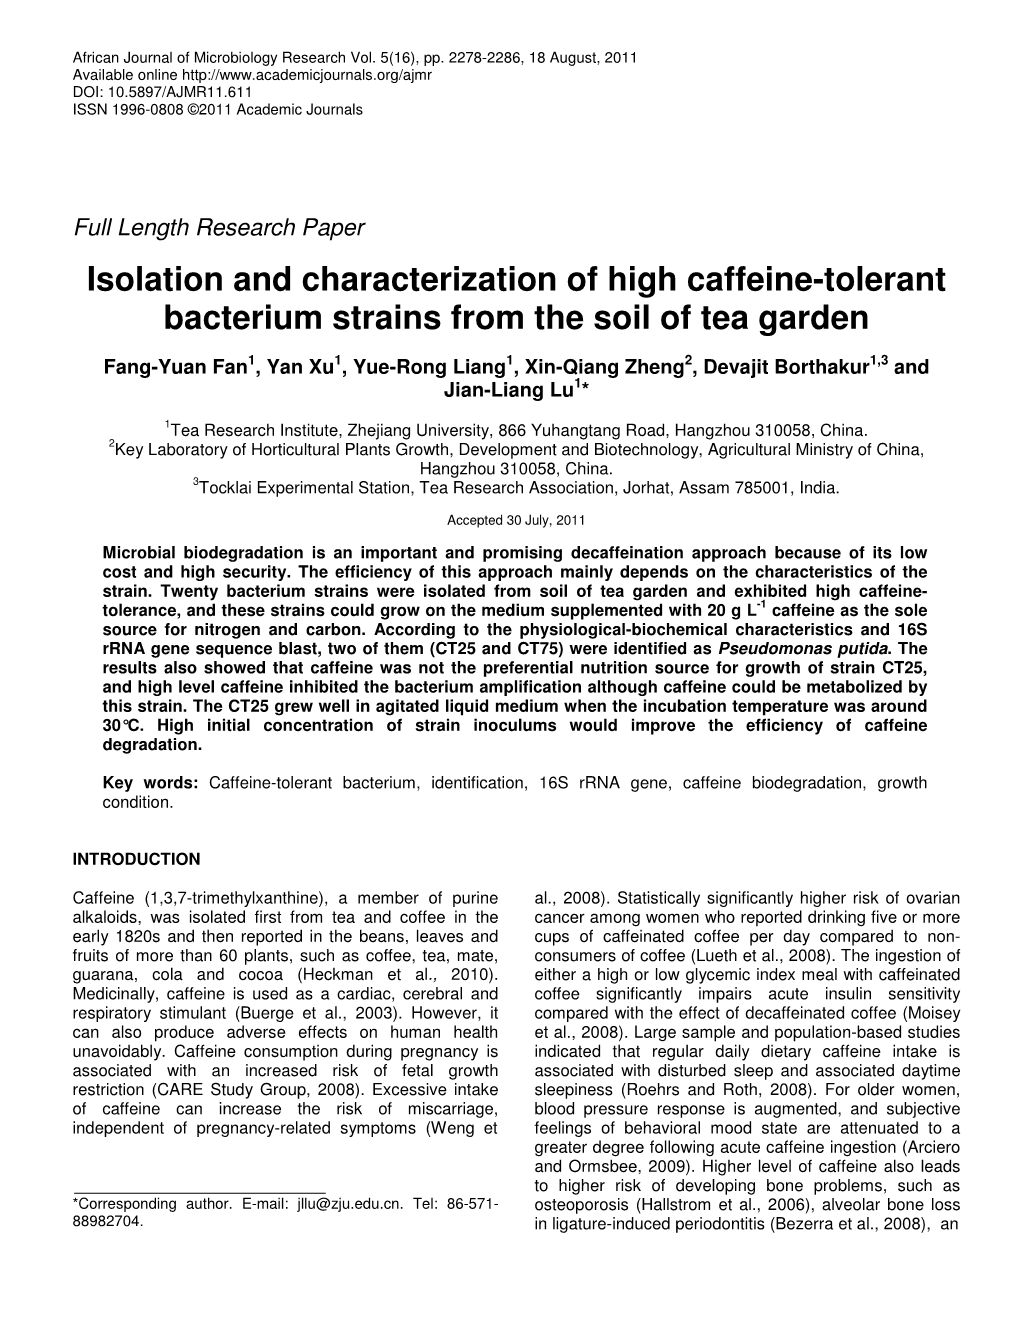 Isolation and Characterization of High Caffeine-Tolerant Bacterium Strains from the Soil of Tea Garden